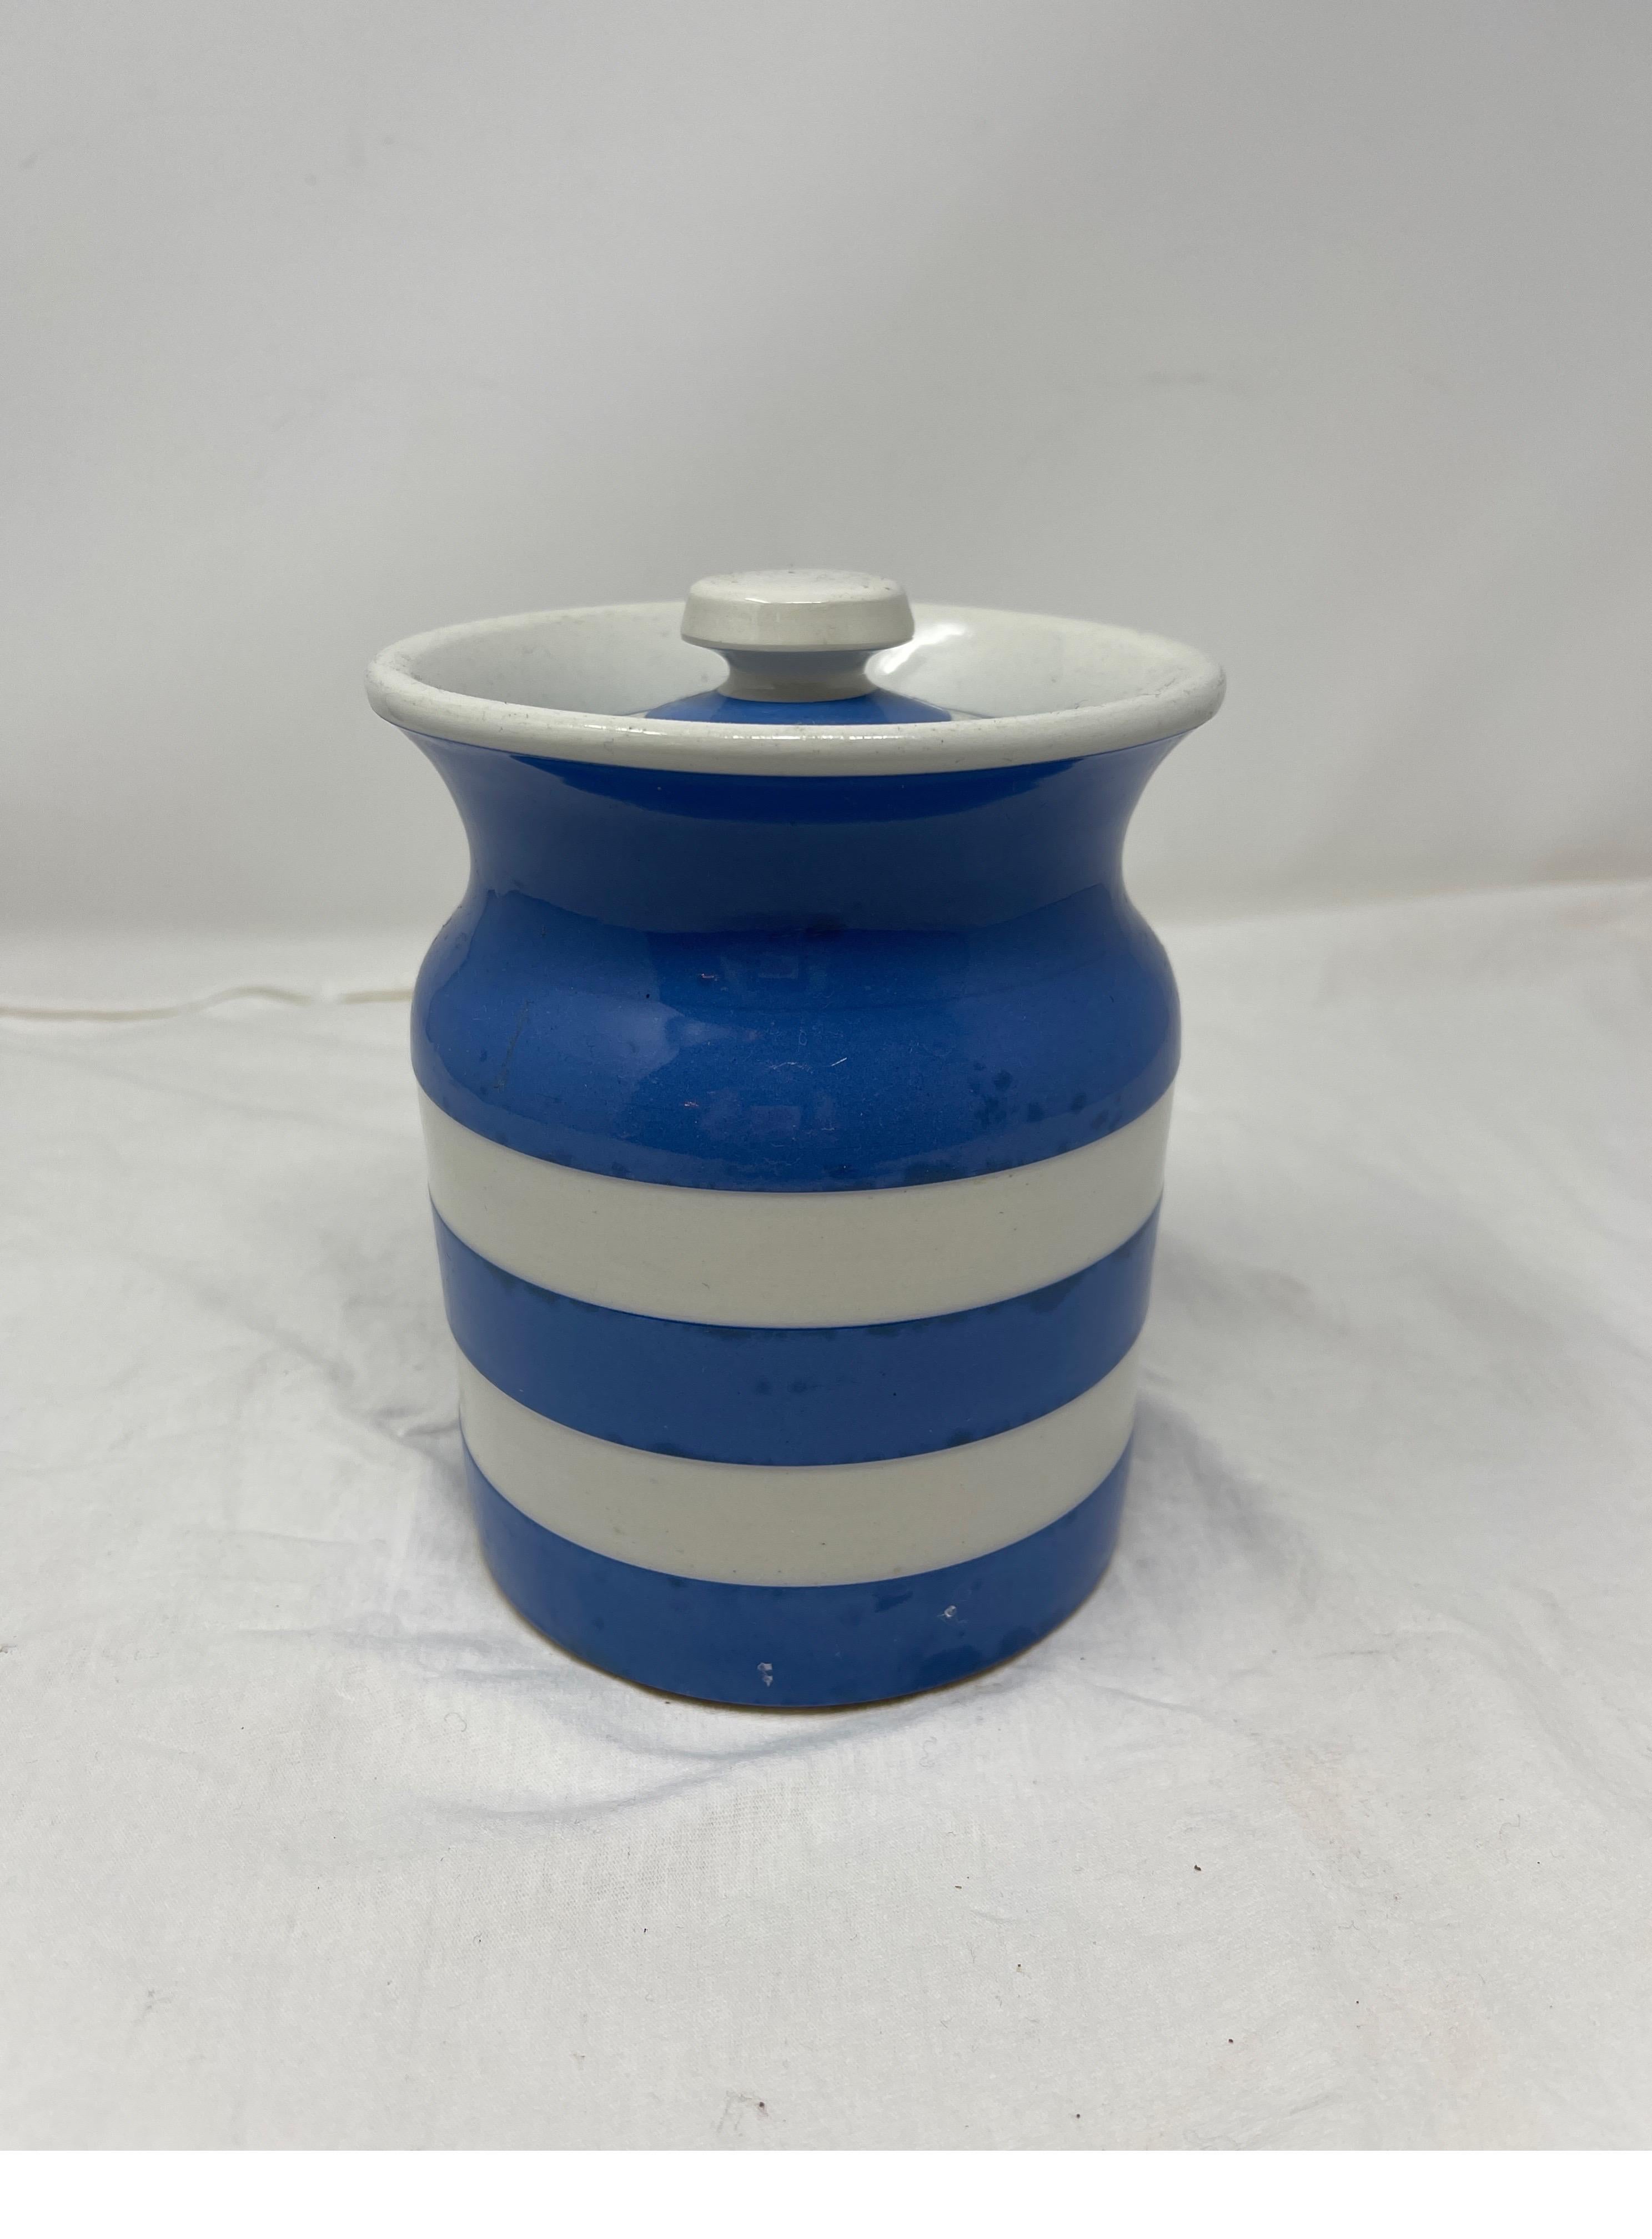 Large blue and white striped vintage T.G. Green canister. T.G. Green was founded in 1864. This fantastically cheery canister can make any counter come alive and make your ground coffee sing. 

6.5